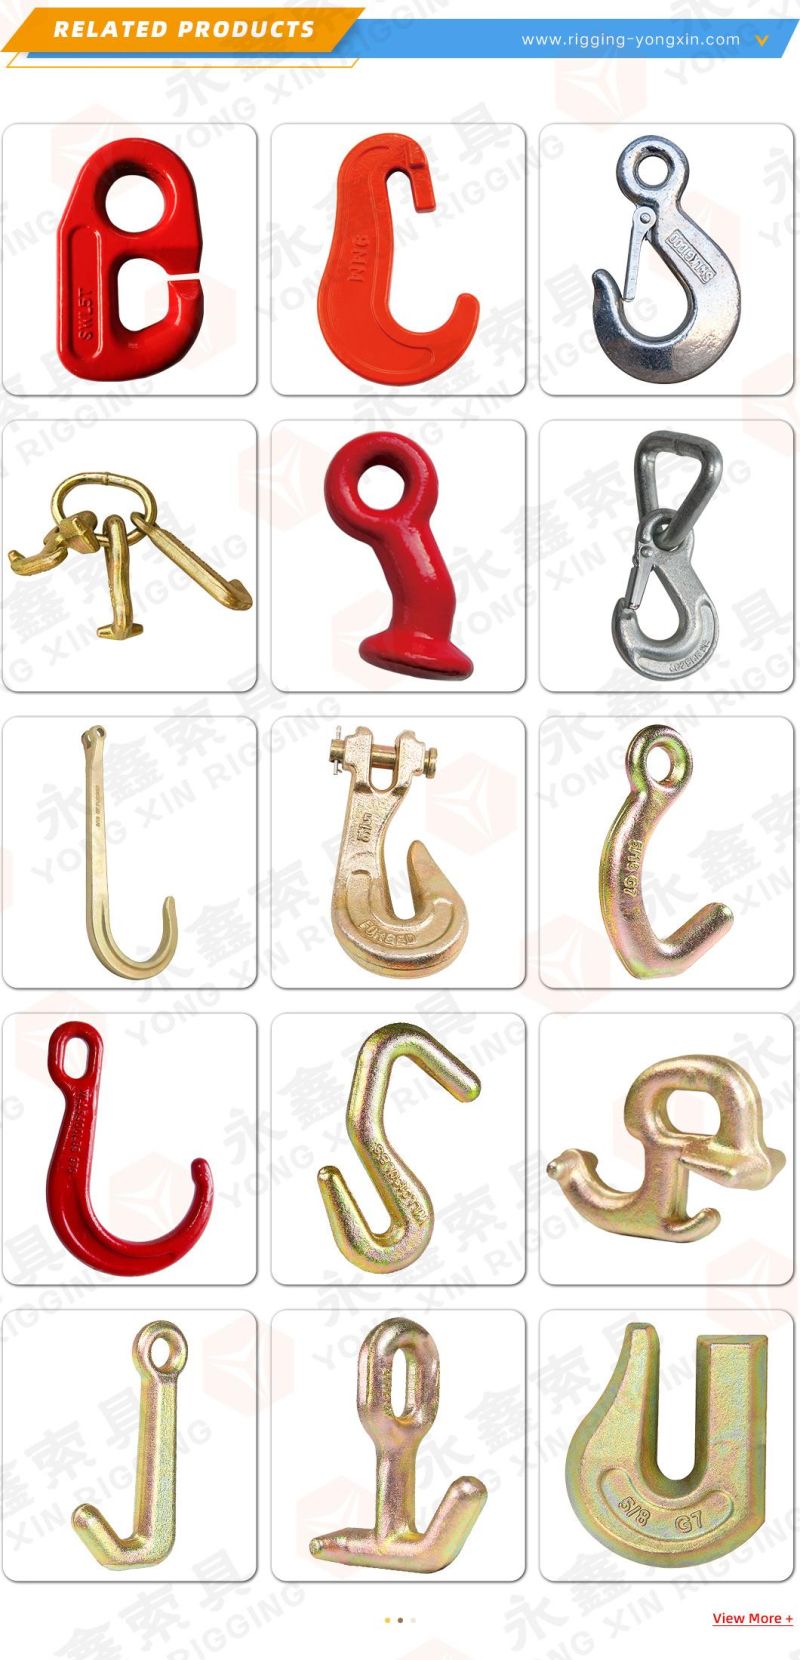 Towing Chain Rtj Towing Hook for Truck